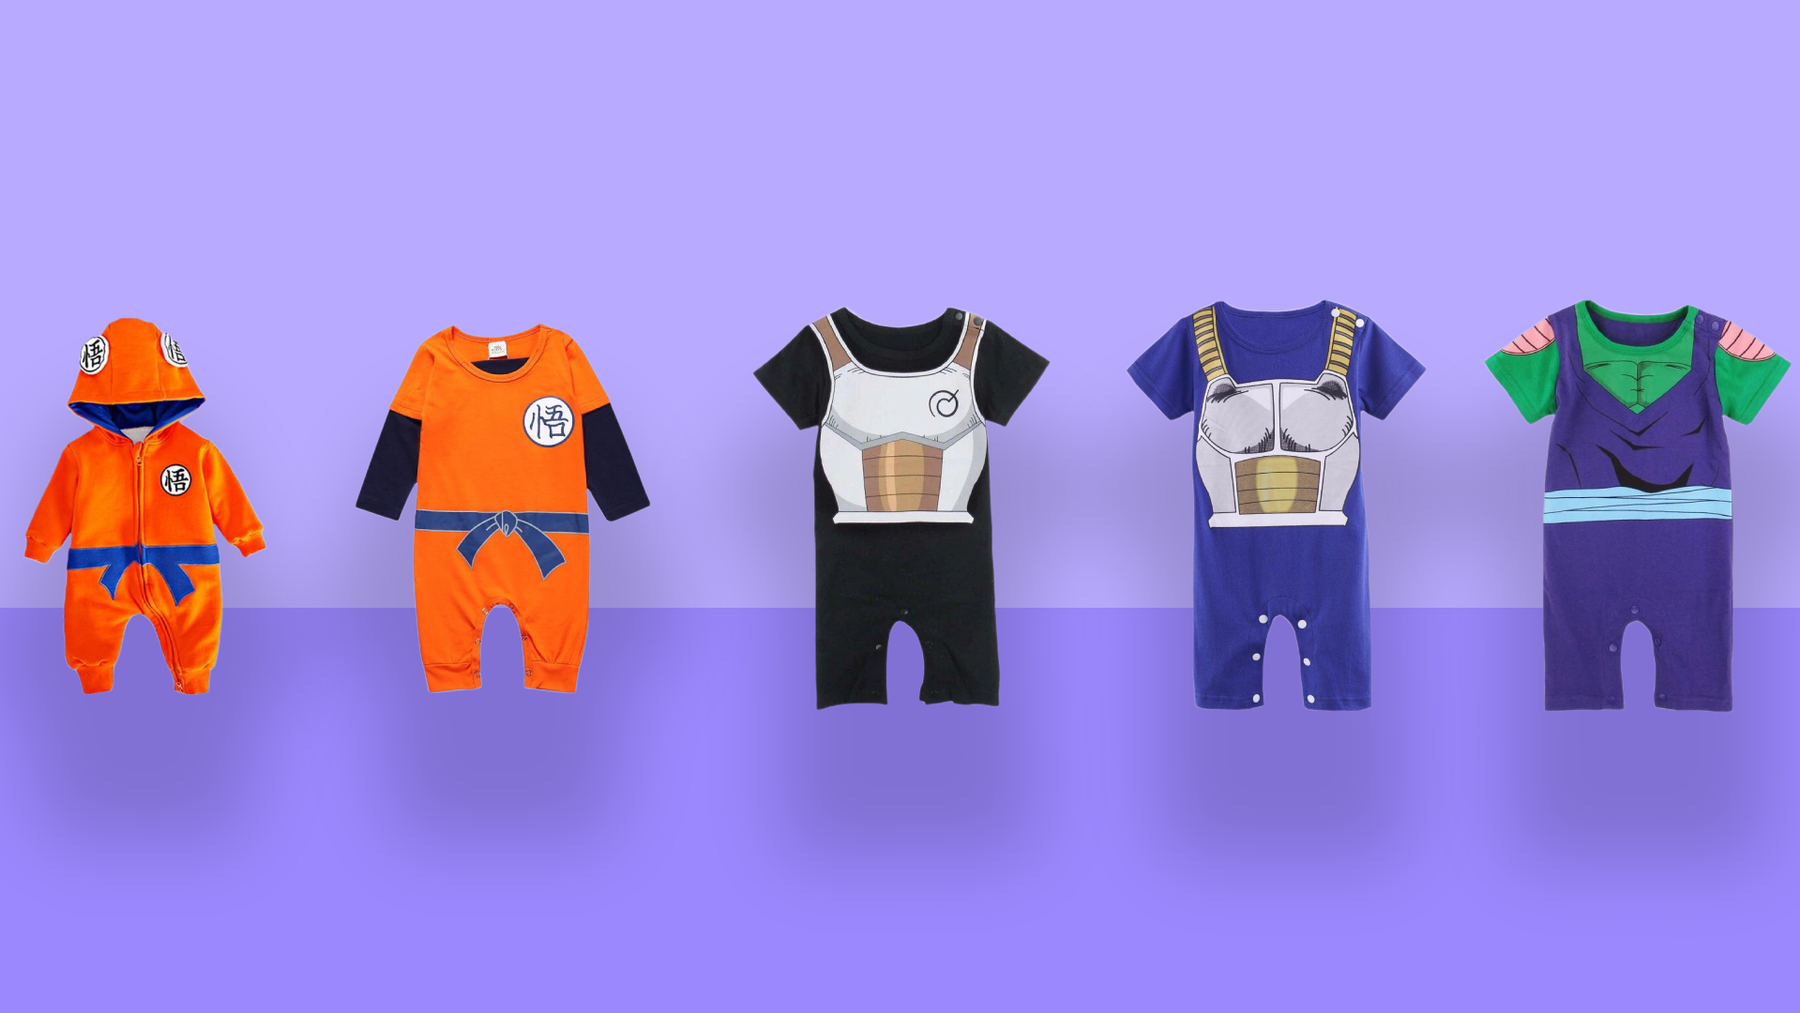 Get Your Little Saiyan Ready: The Top 5 Dragon Ball Z Baby Costumes